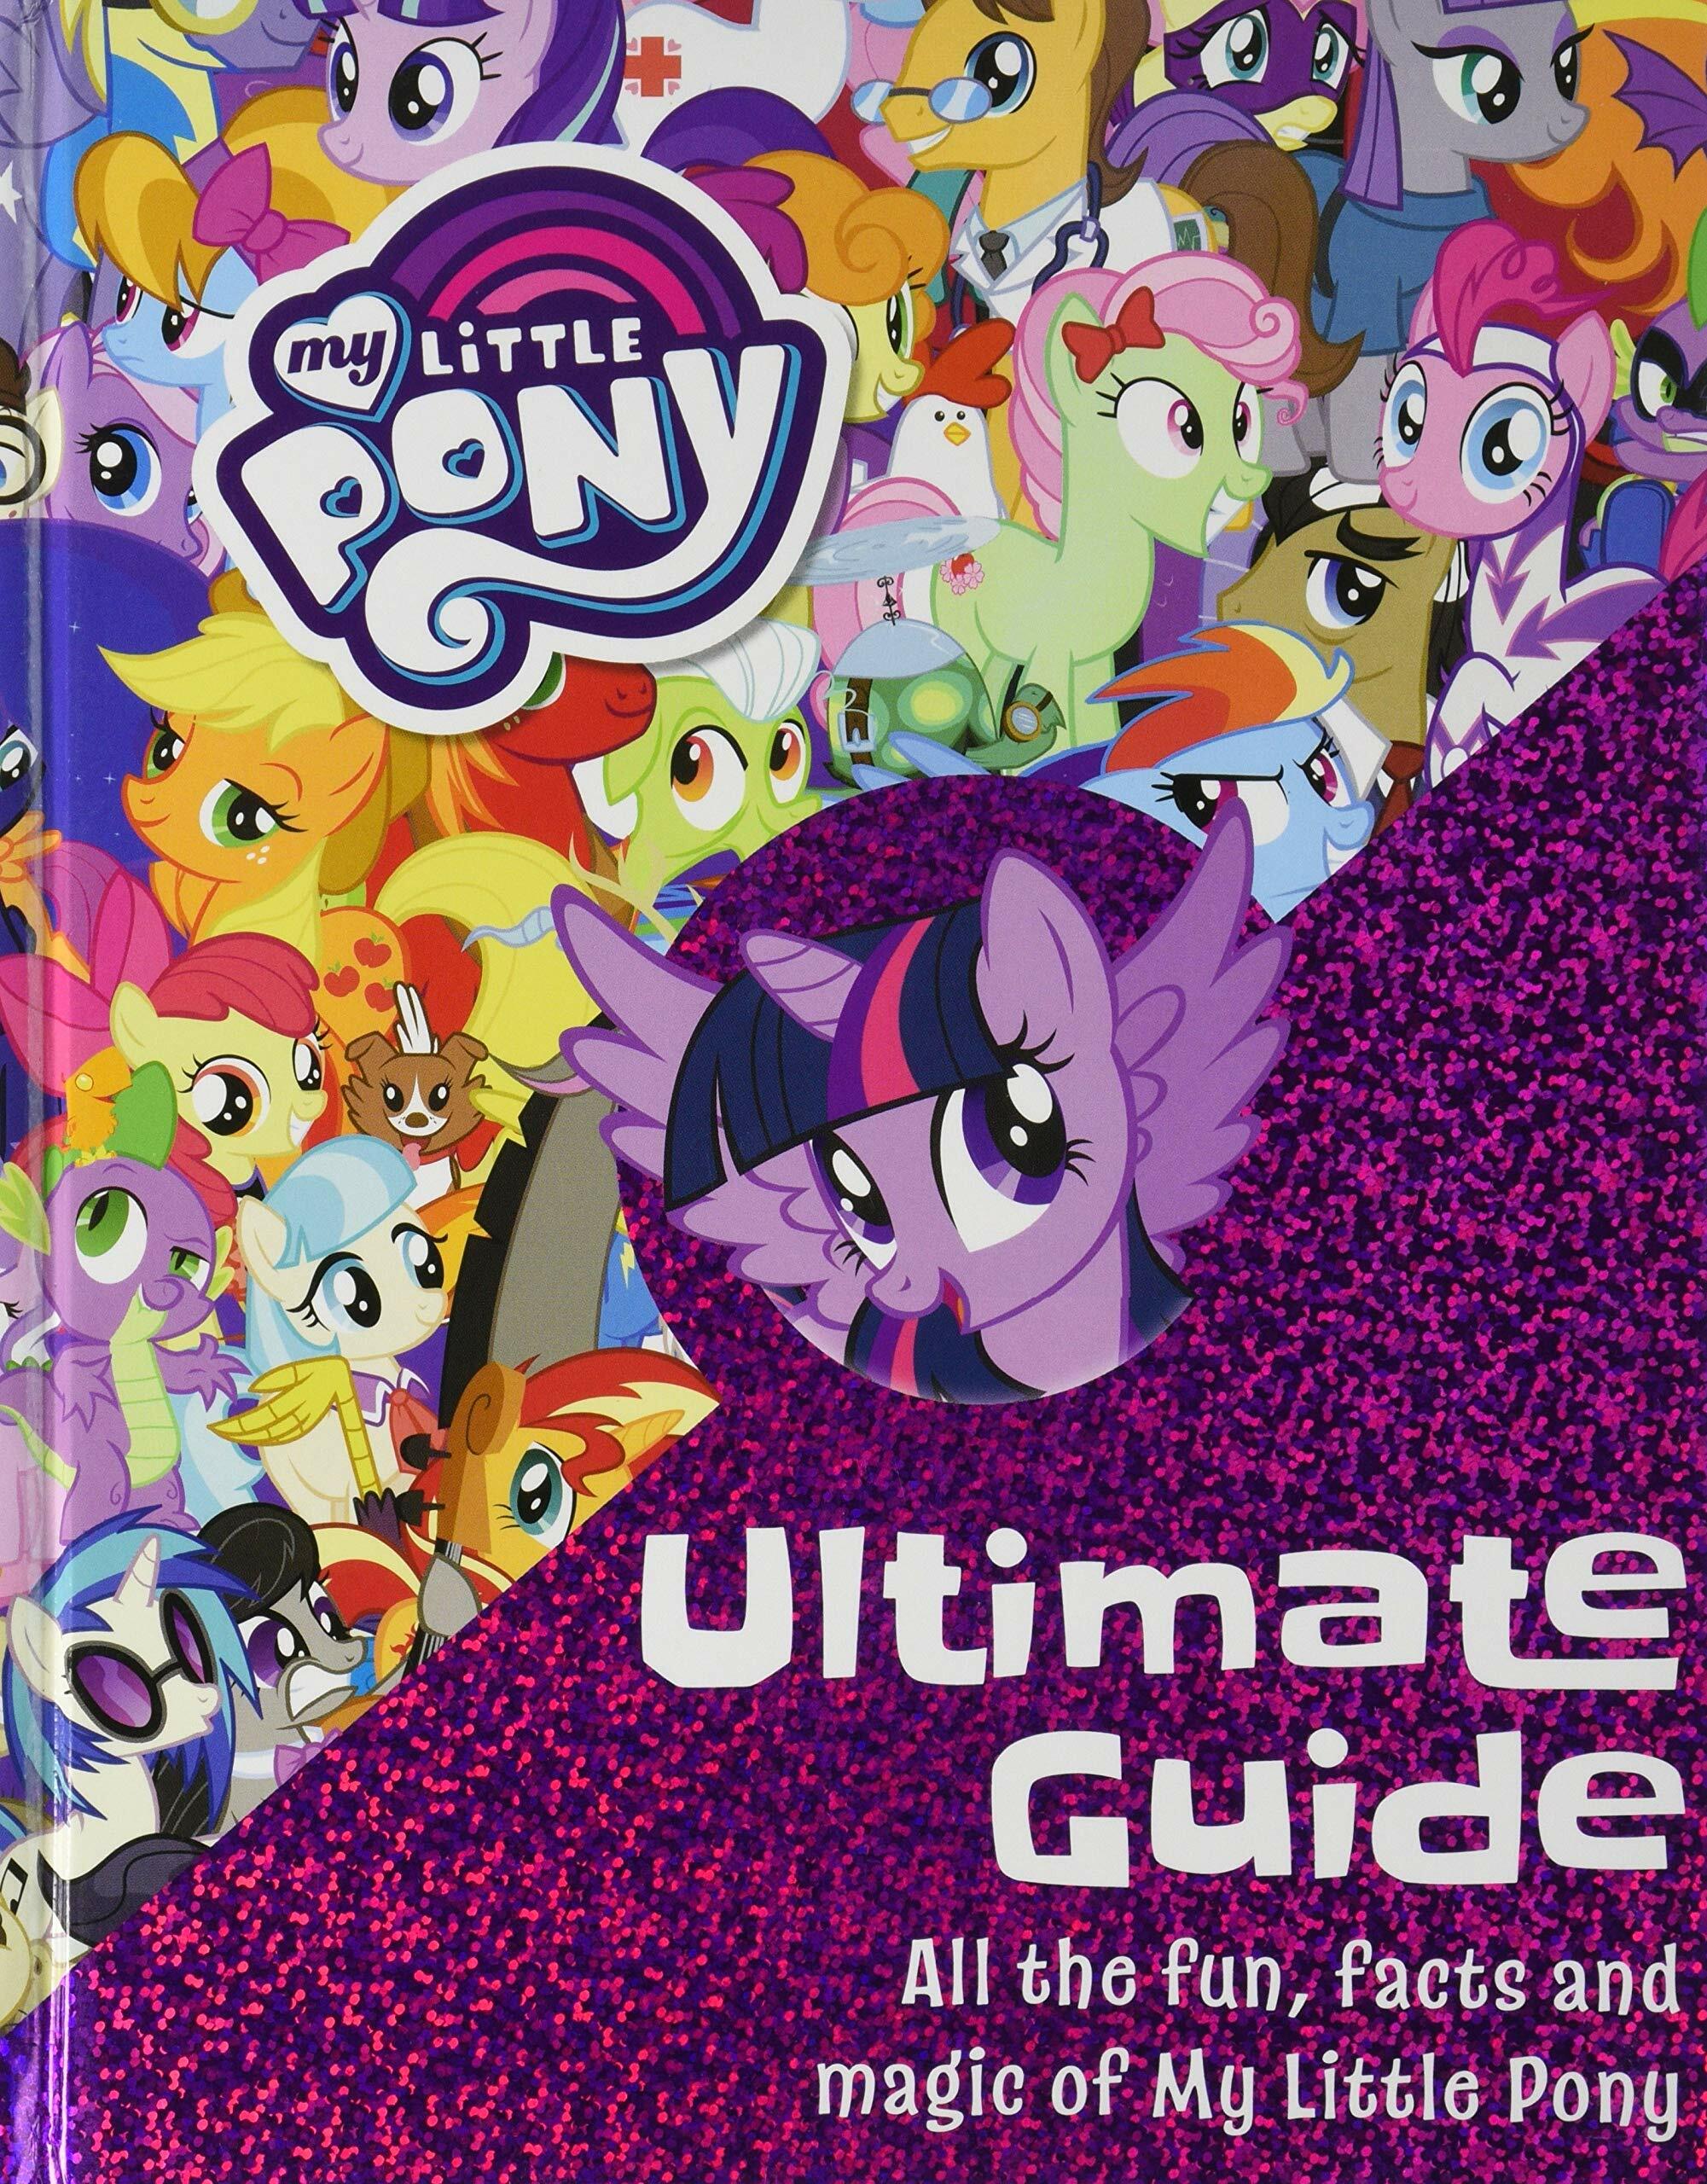 My Little Pony: The Ultimate Guide: All the Fun, Facts and Magic of My Little Pony (Hardcover)